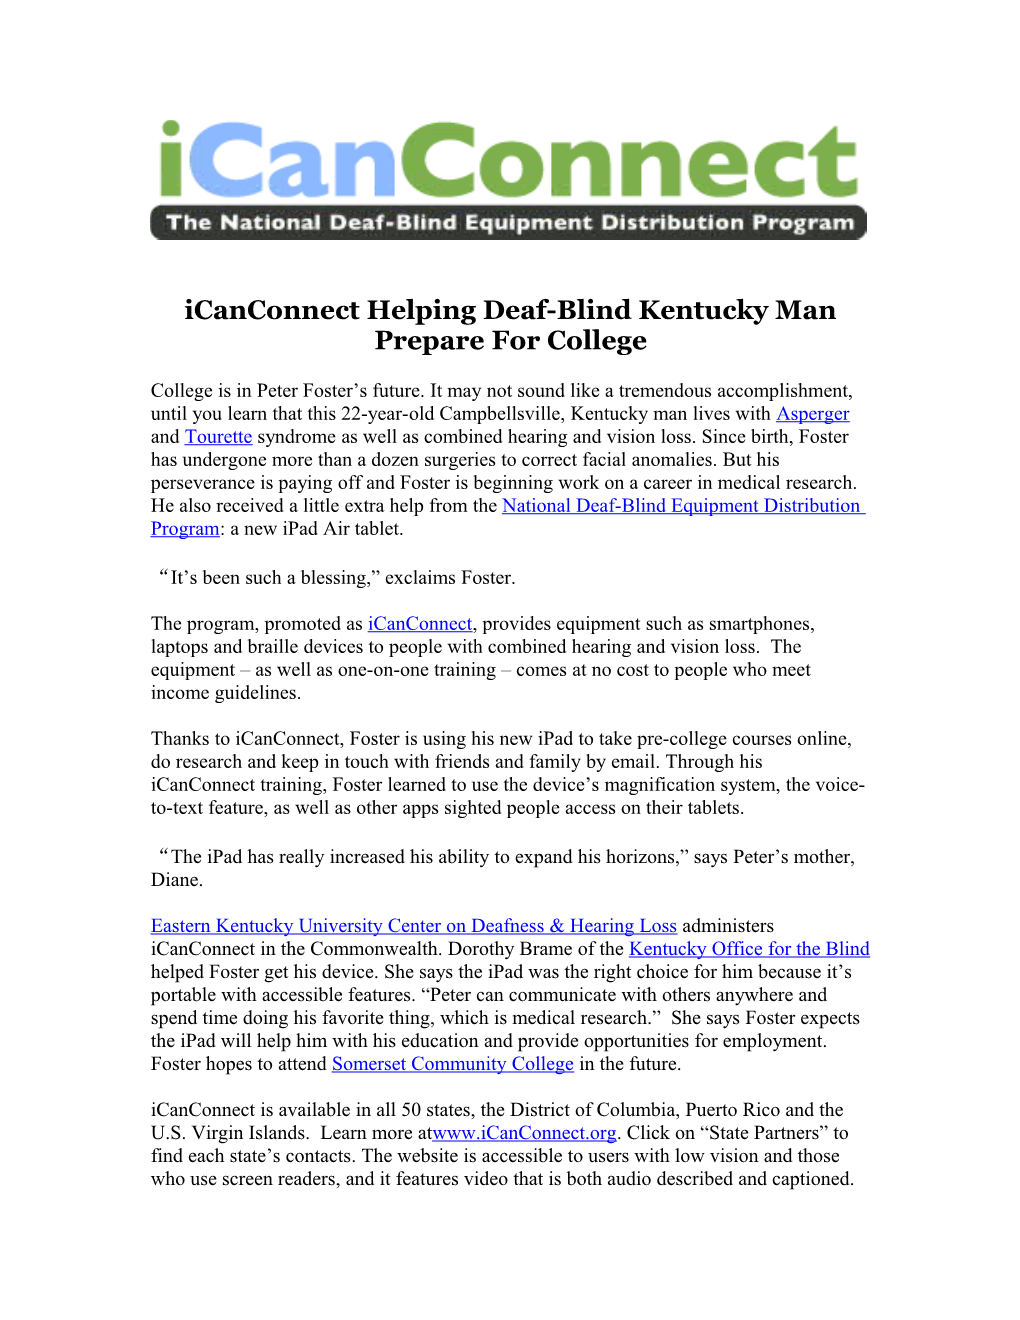 Icanconnect Helping Deaf-Blind Kentucky Man Prepare for College